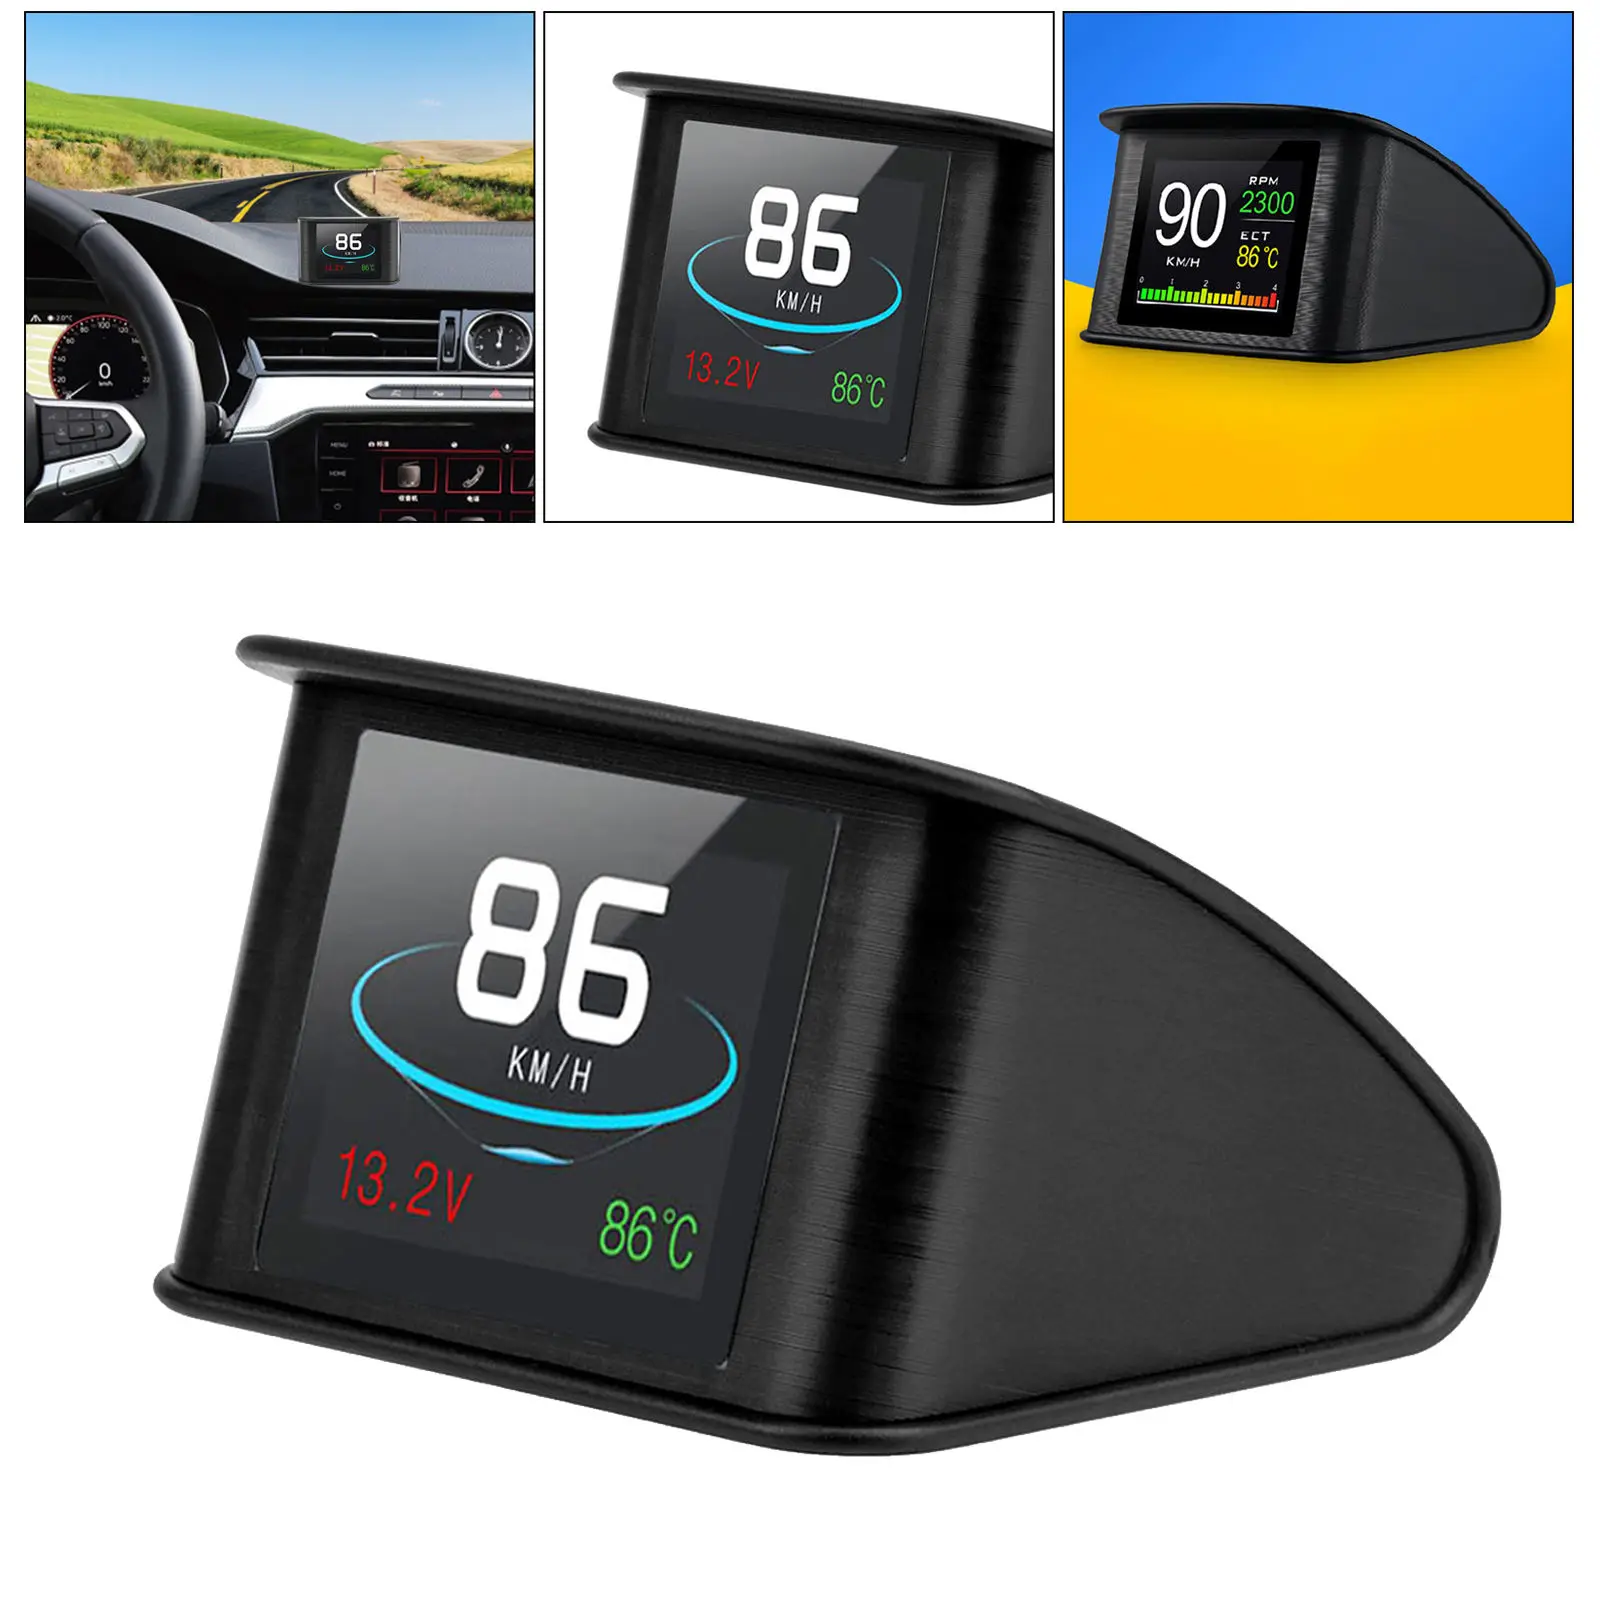 HUD LCD Screen Car Head Up Display w/GPS Navigation OverSpeed Alarm Voltmeter Warning for All Vehicle